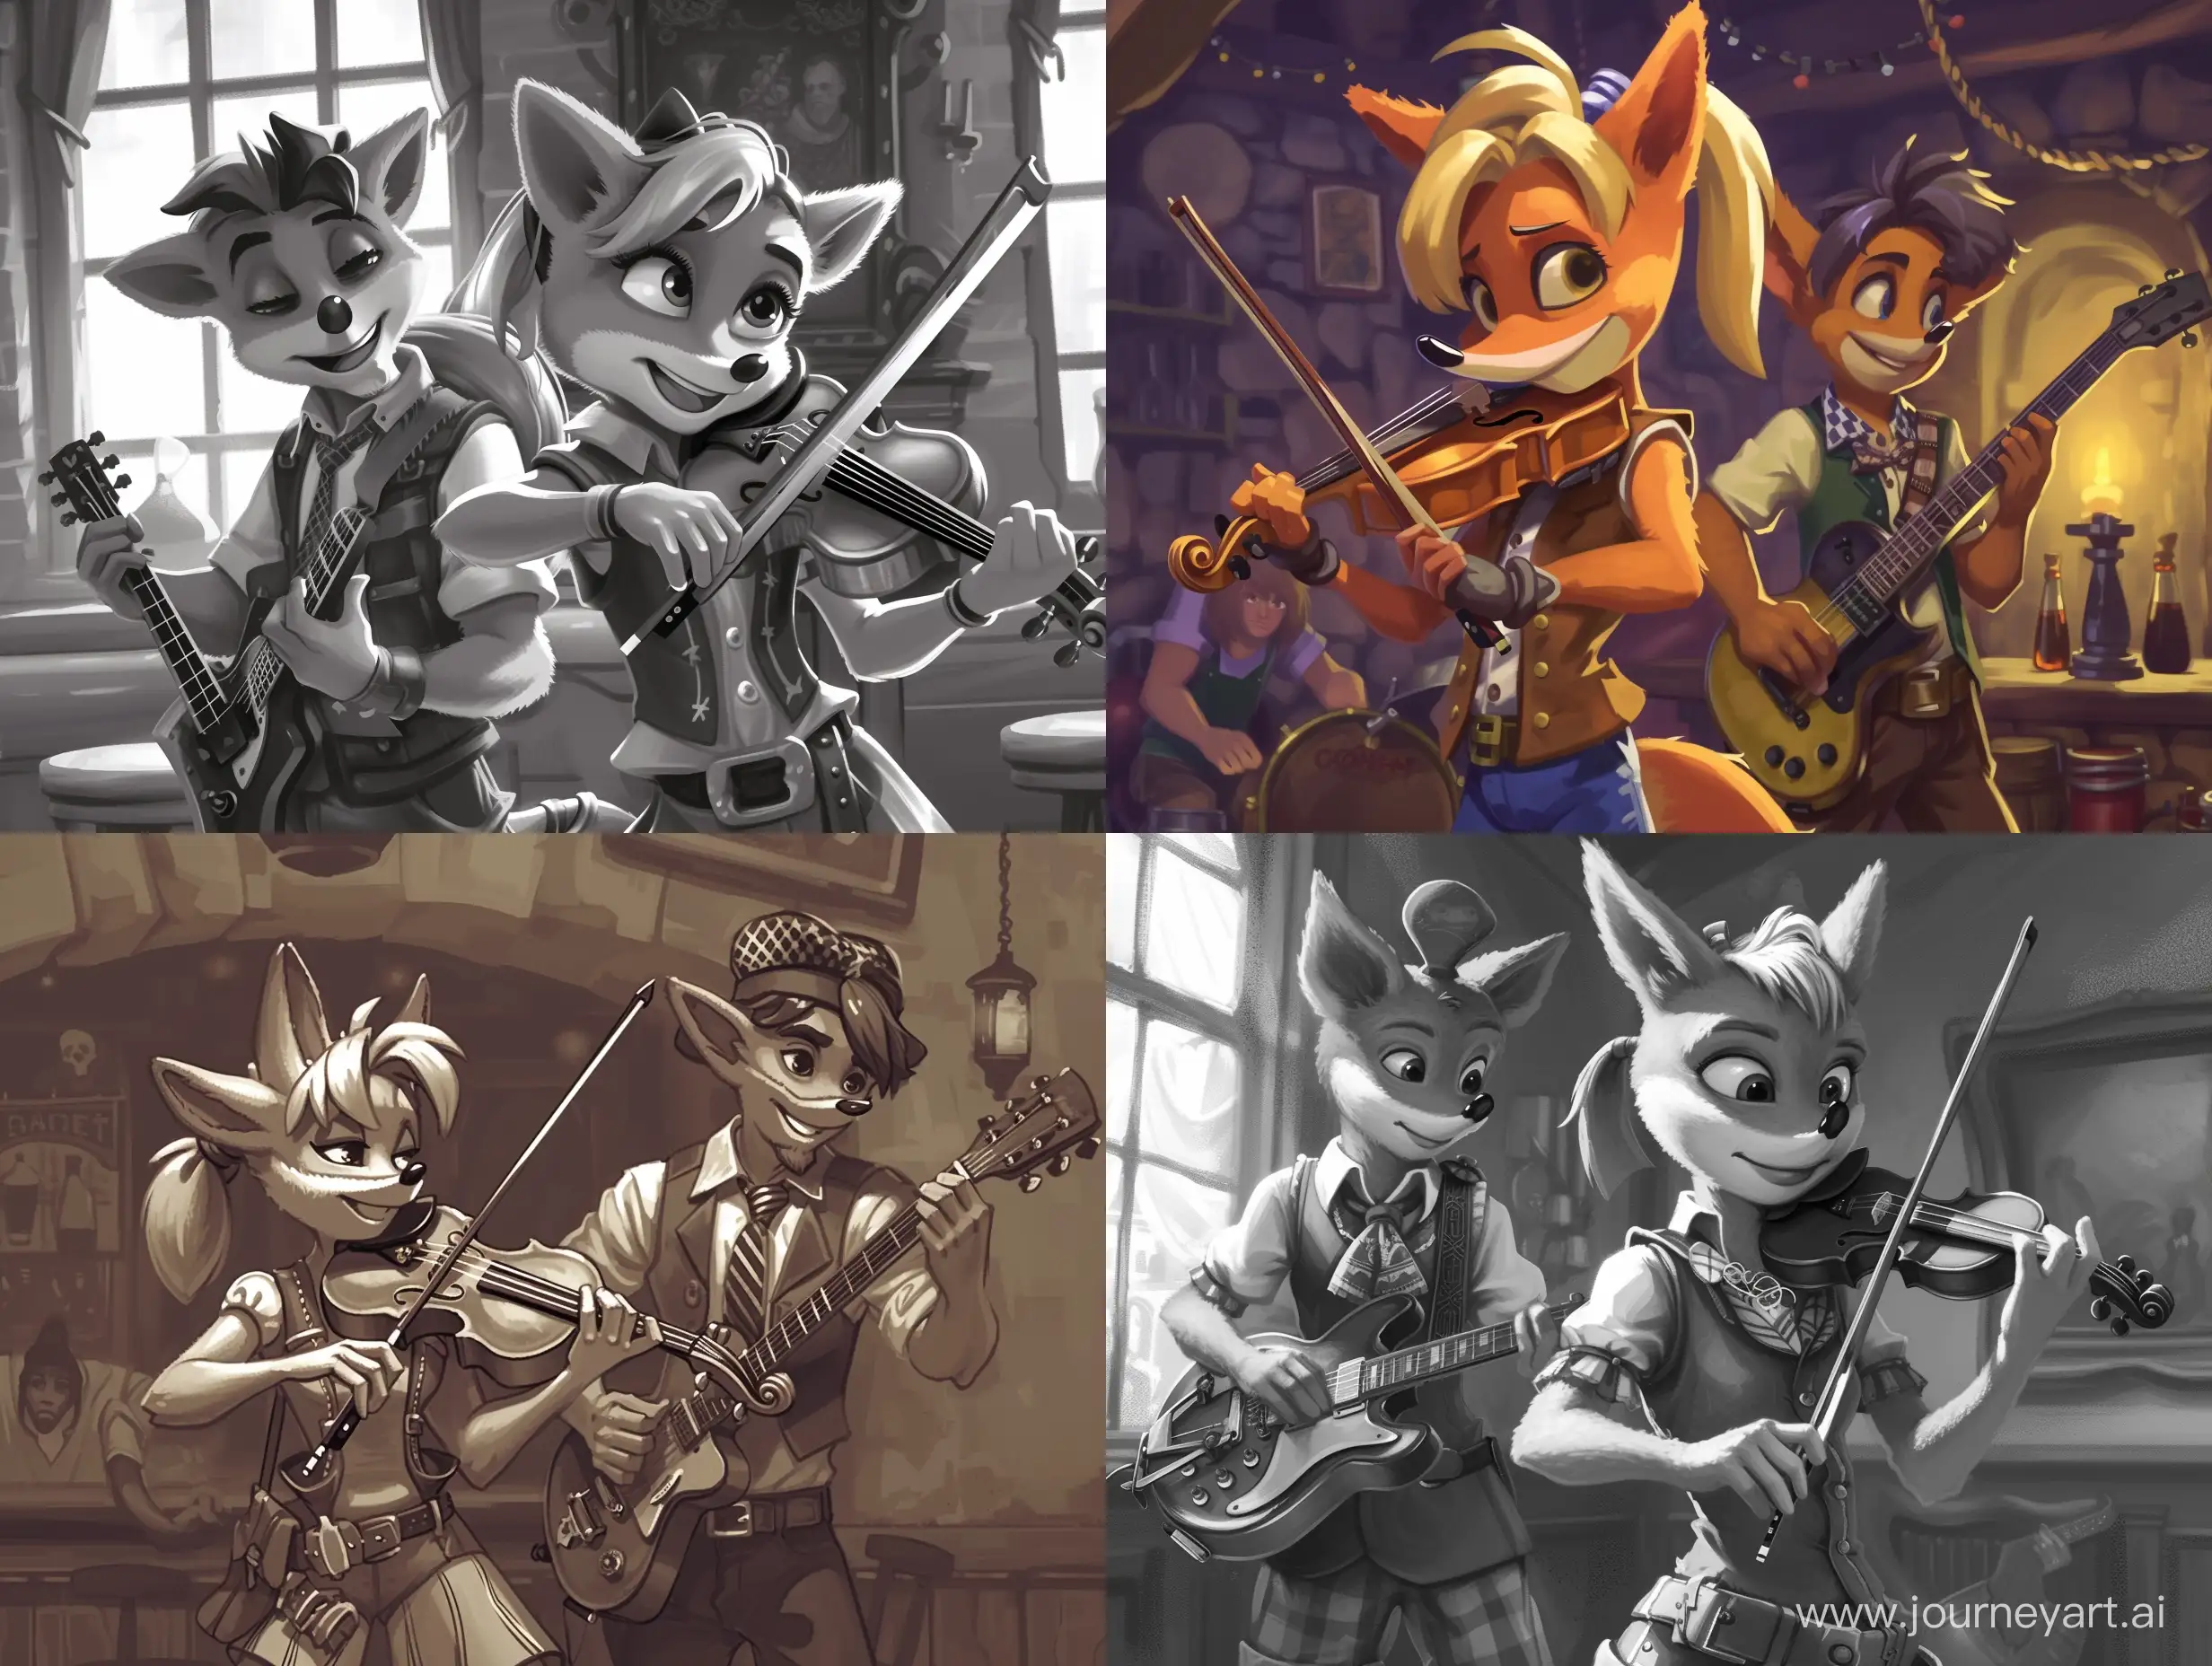 Tavern-Musicians-Coco-Bandicoot-and-Companion-in-Costume-Perform-on-Violin-and-Electric-Guitar